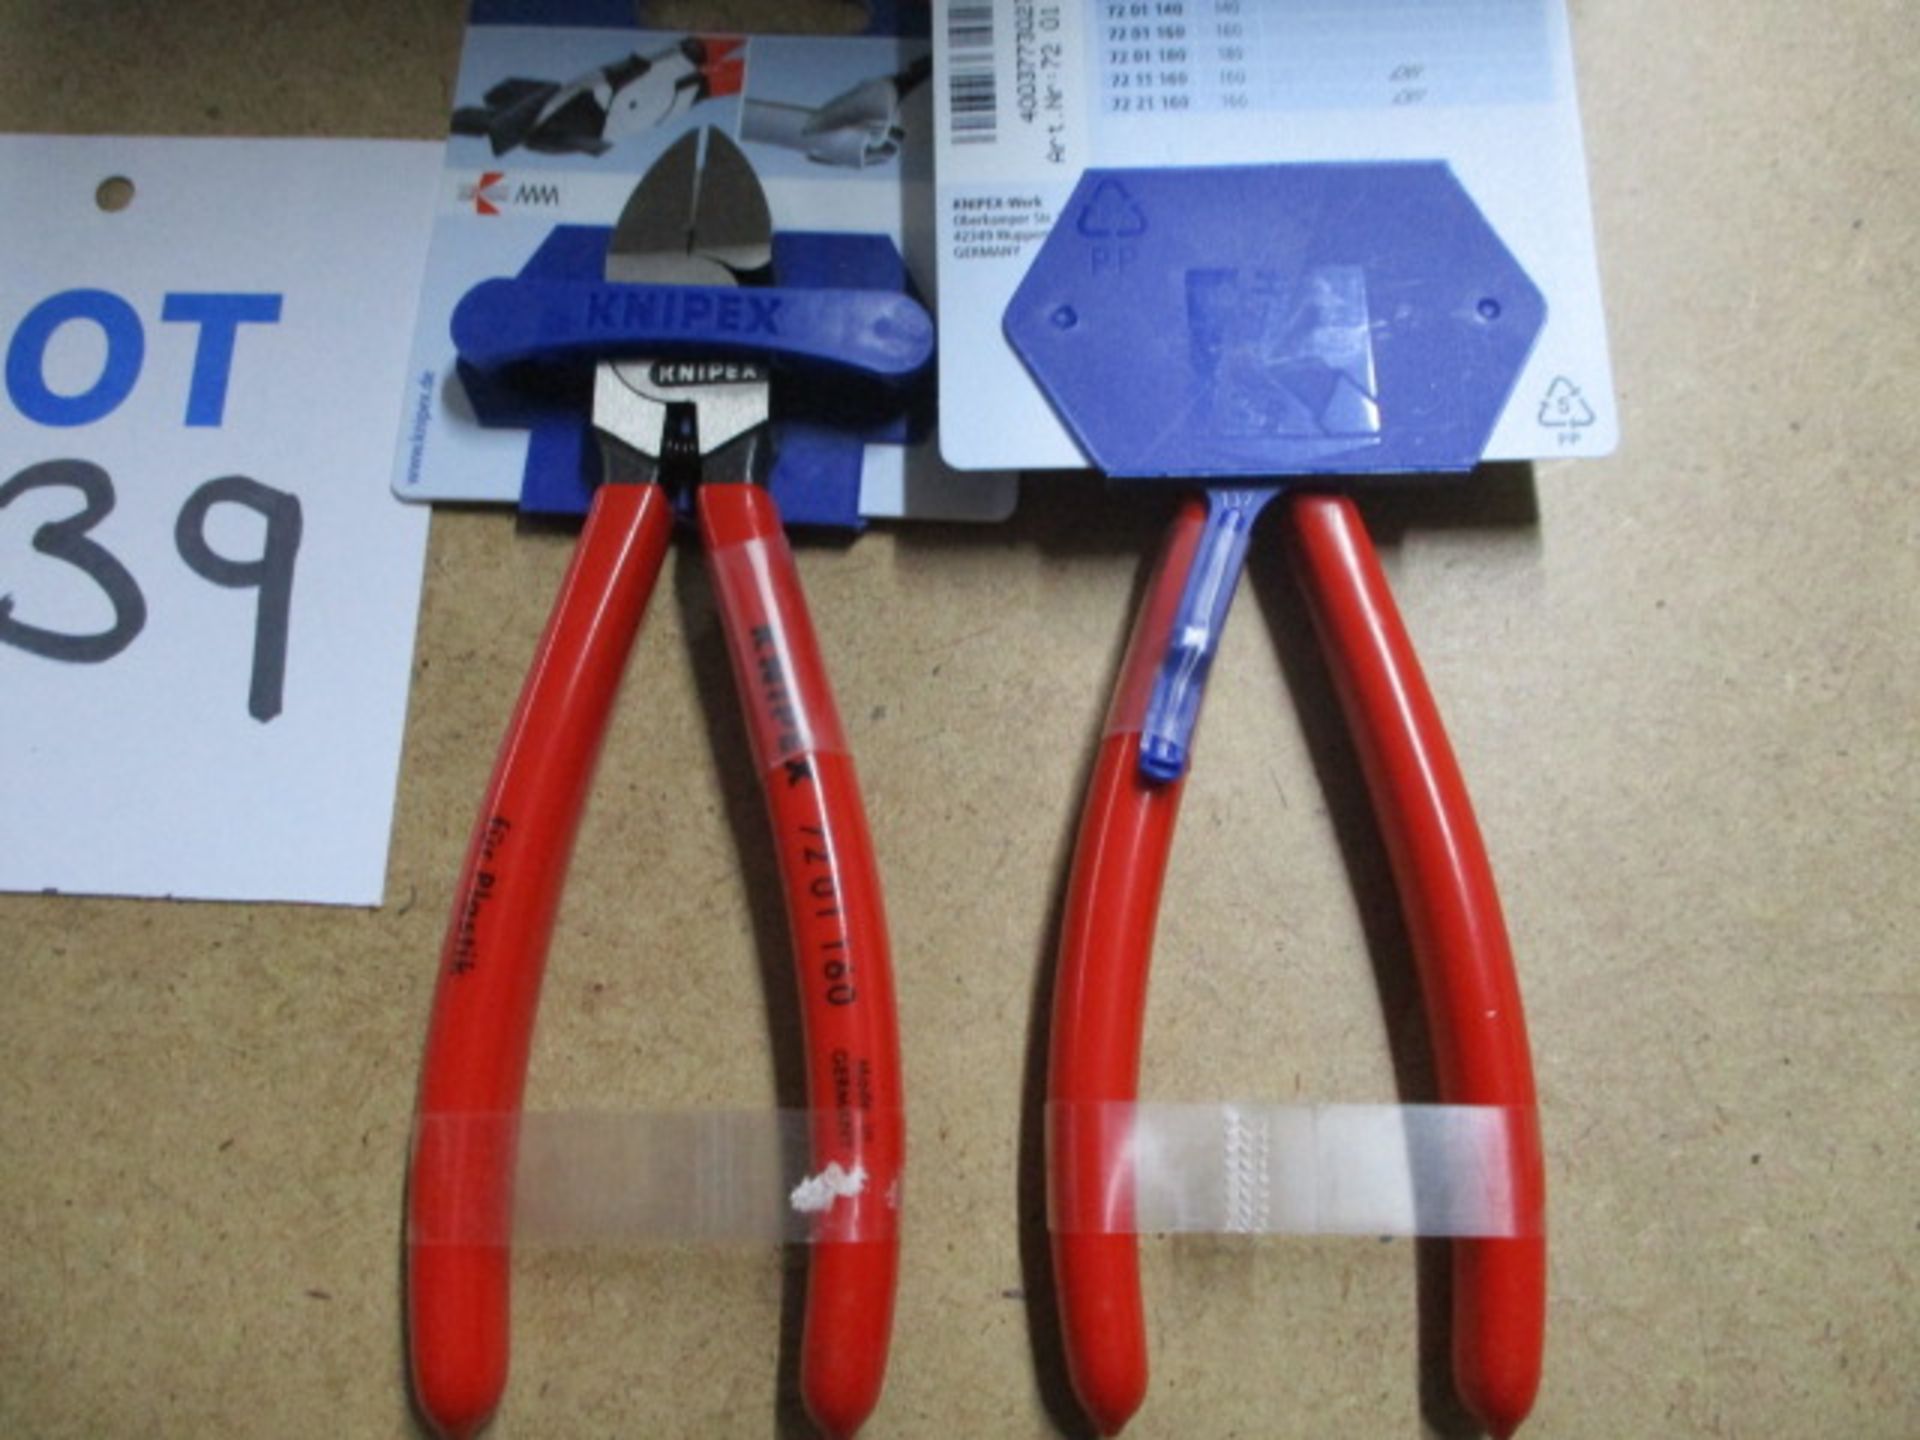 Knipex diagonal cutters - Image 2 of 4